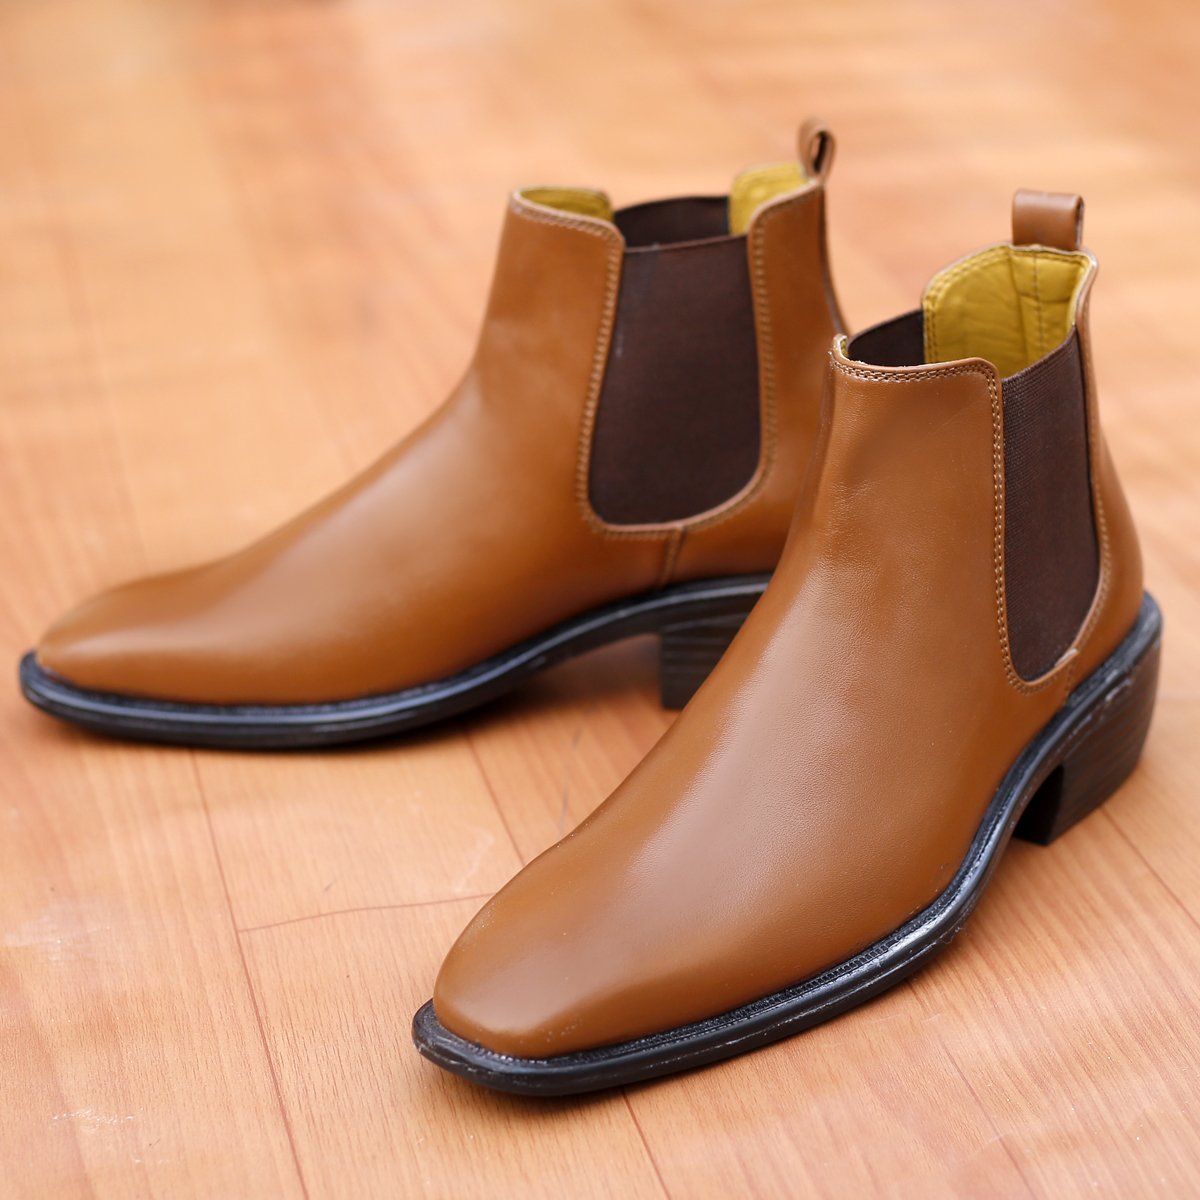 Men's Stylish Tan Formal and Casual Wear British Chelsea Ankle Boots